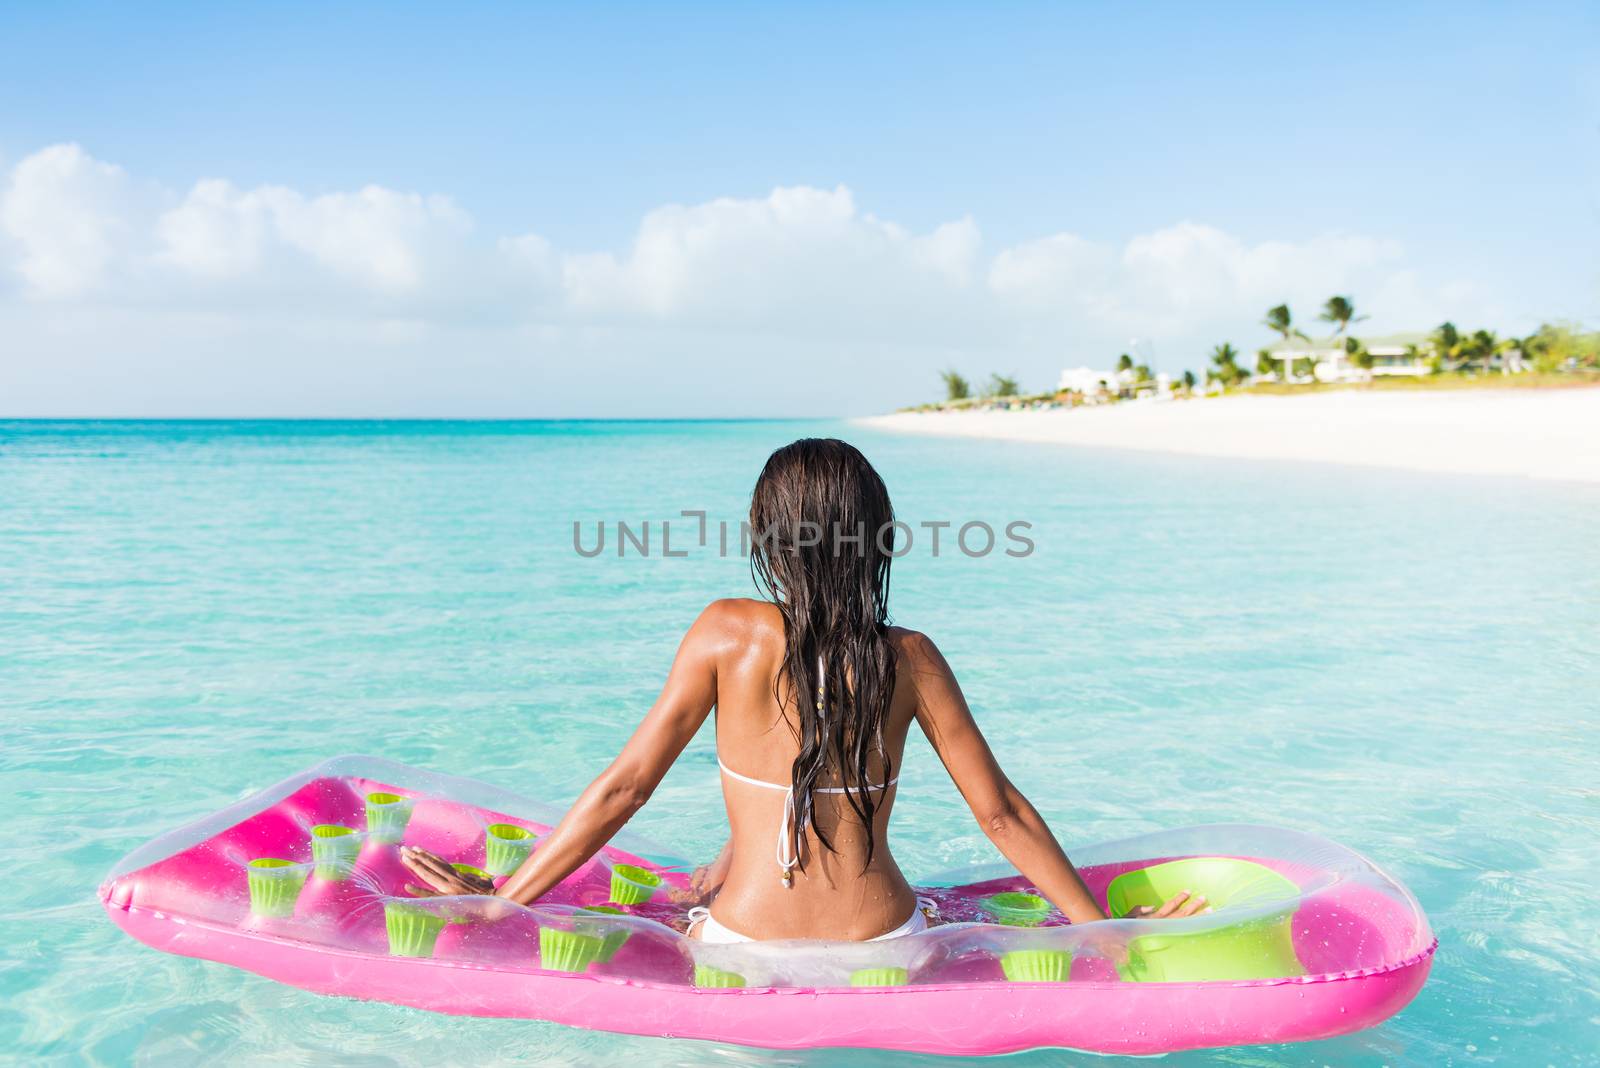 Beach relaxation woman floating on pink inflatable air bed pool mattress toy float in ocean beach background in pristine blue turquoise water at luxury caribbean getaway resort.